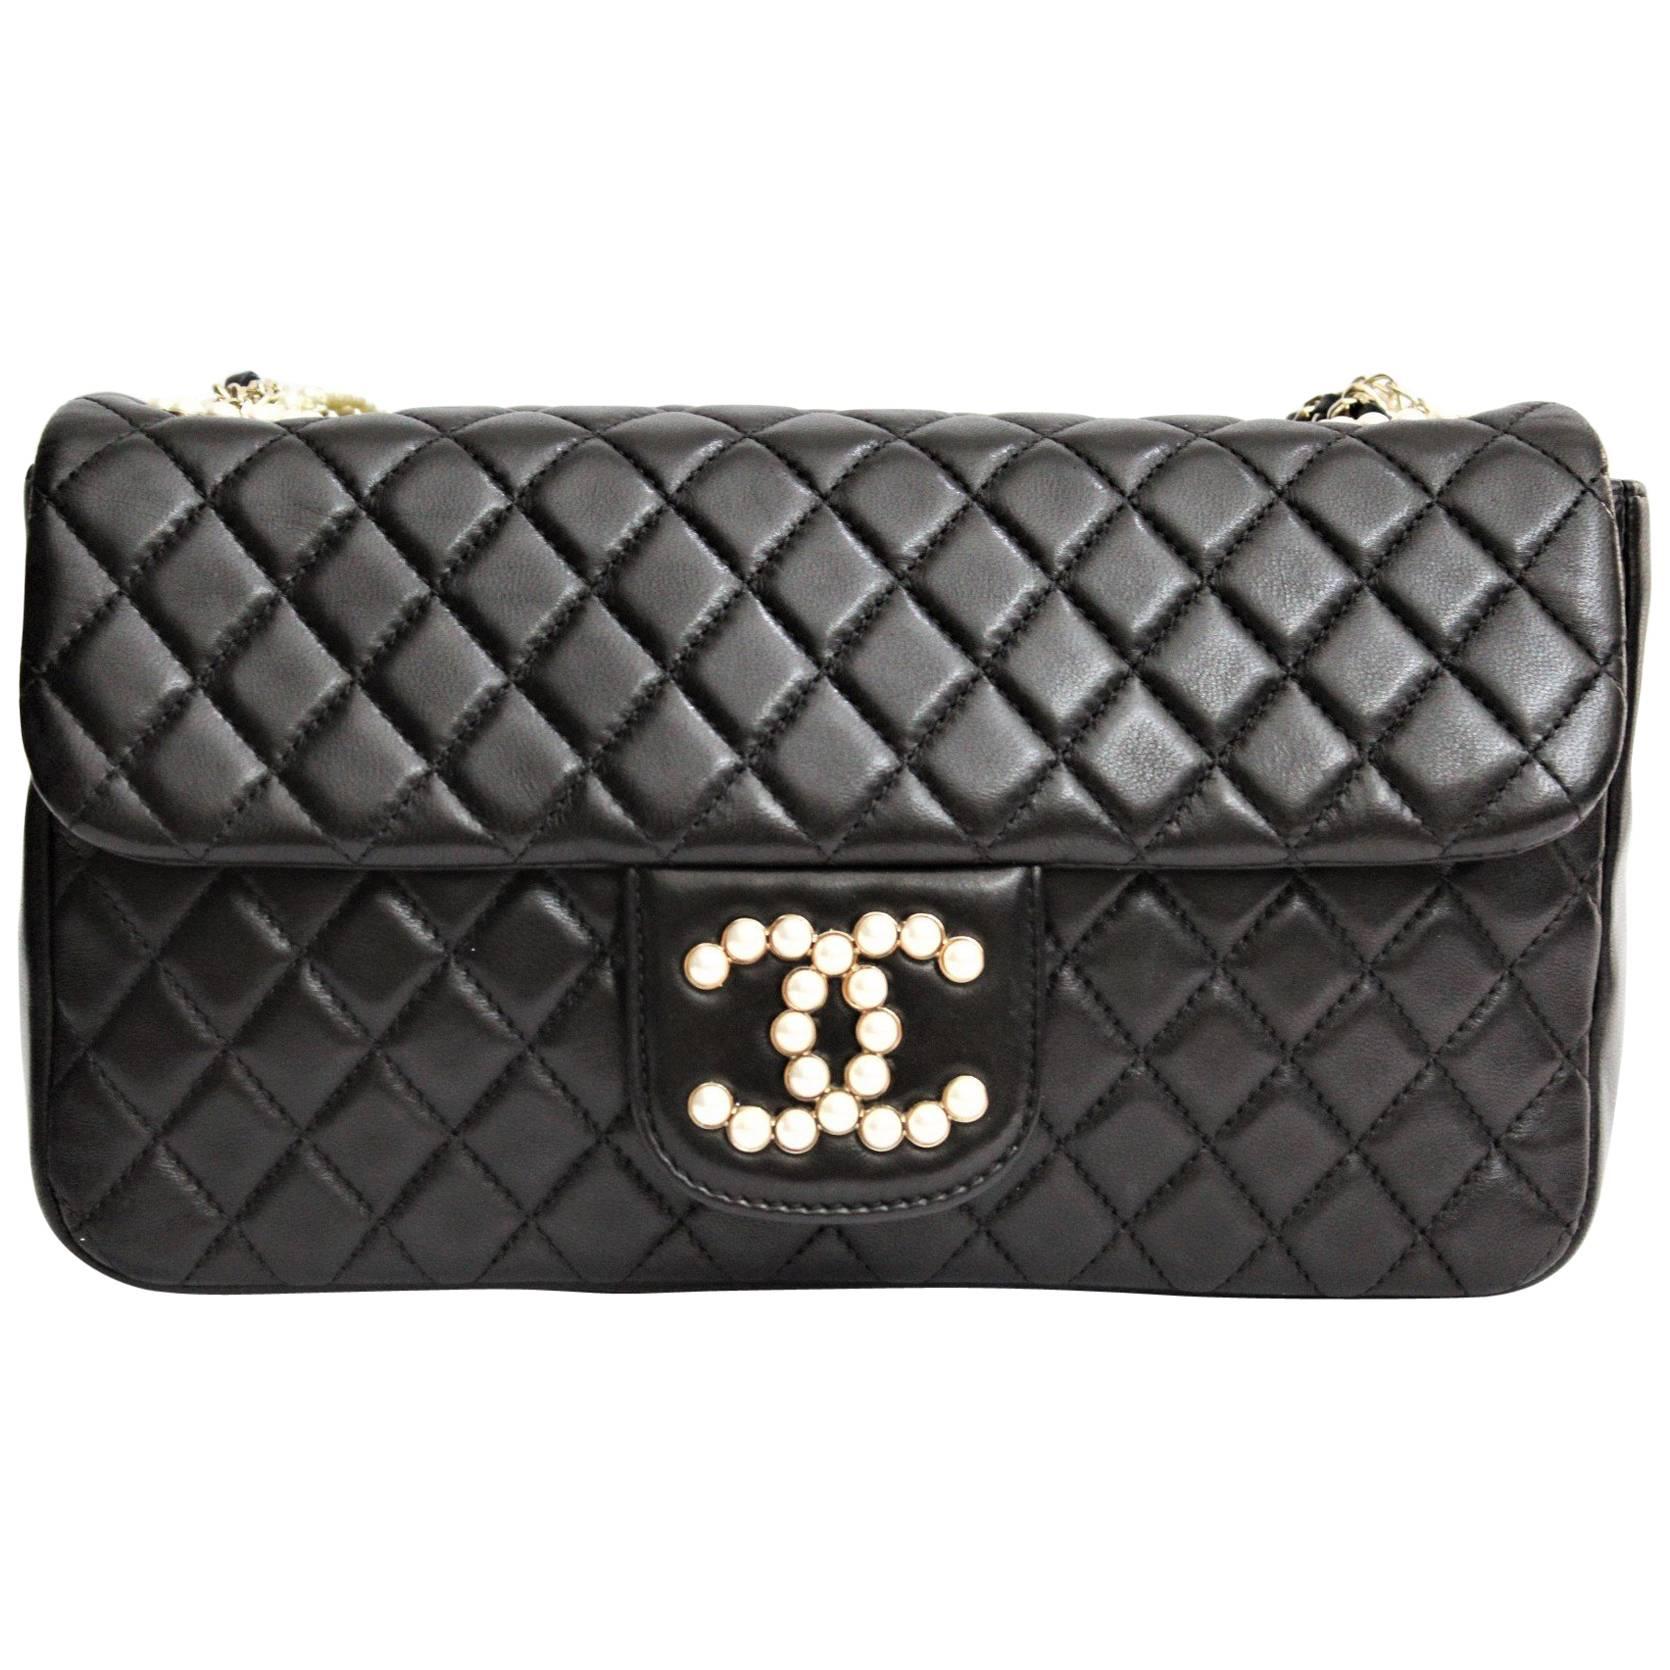 Chanel  Westminster Flap Bag Cruise 2014